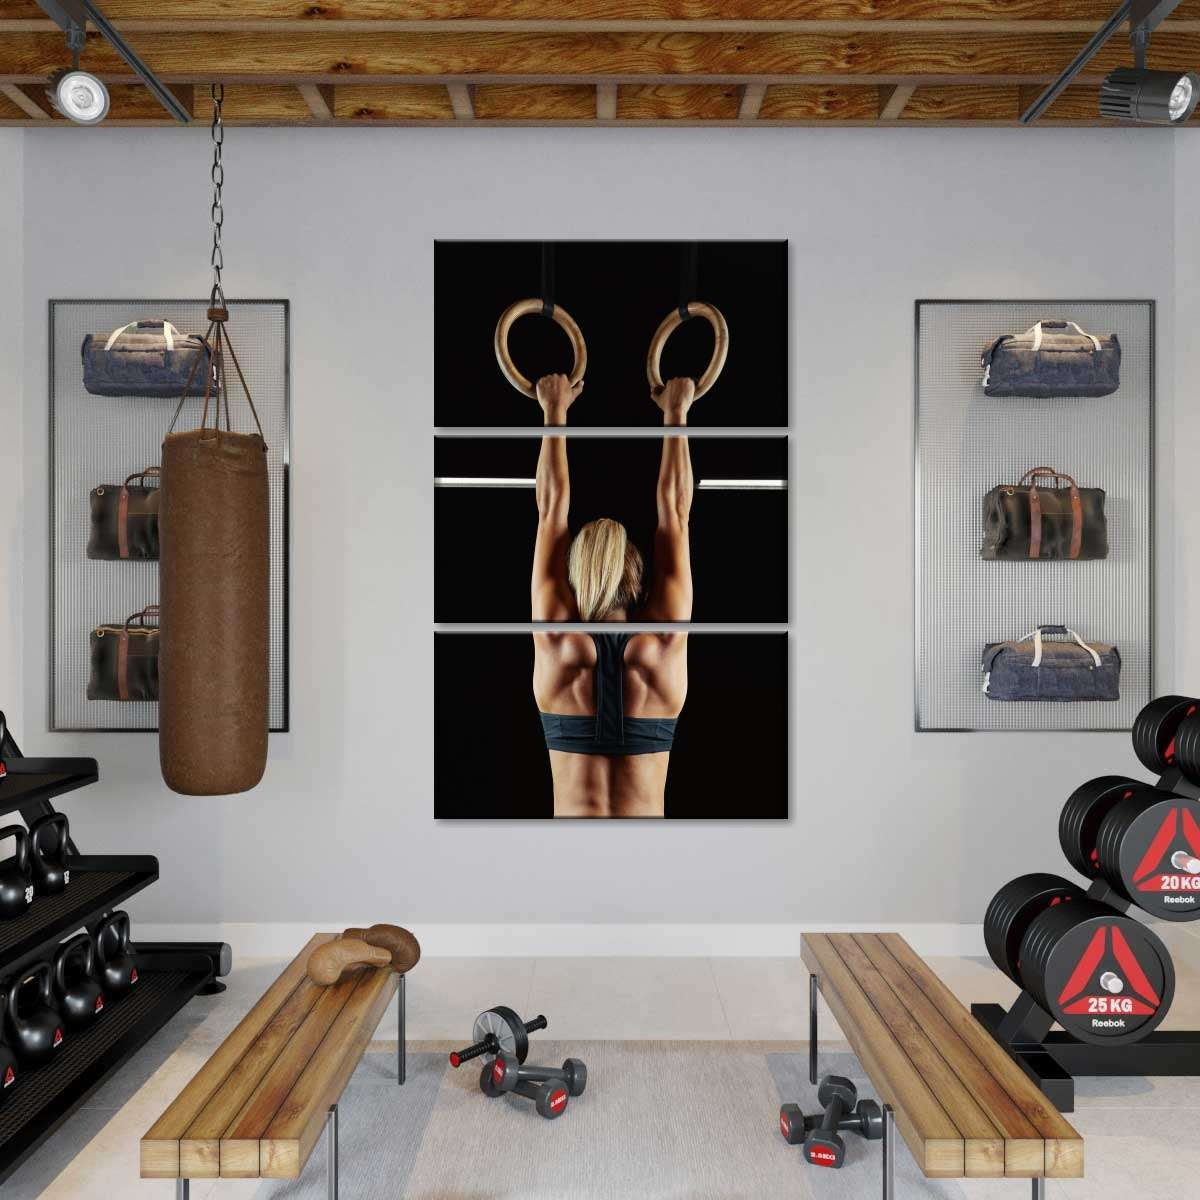 Home Gym Designs That Will Make You Wanna Sweat  Gym room at home, Home gym  decor, Home gym design